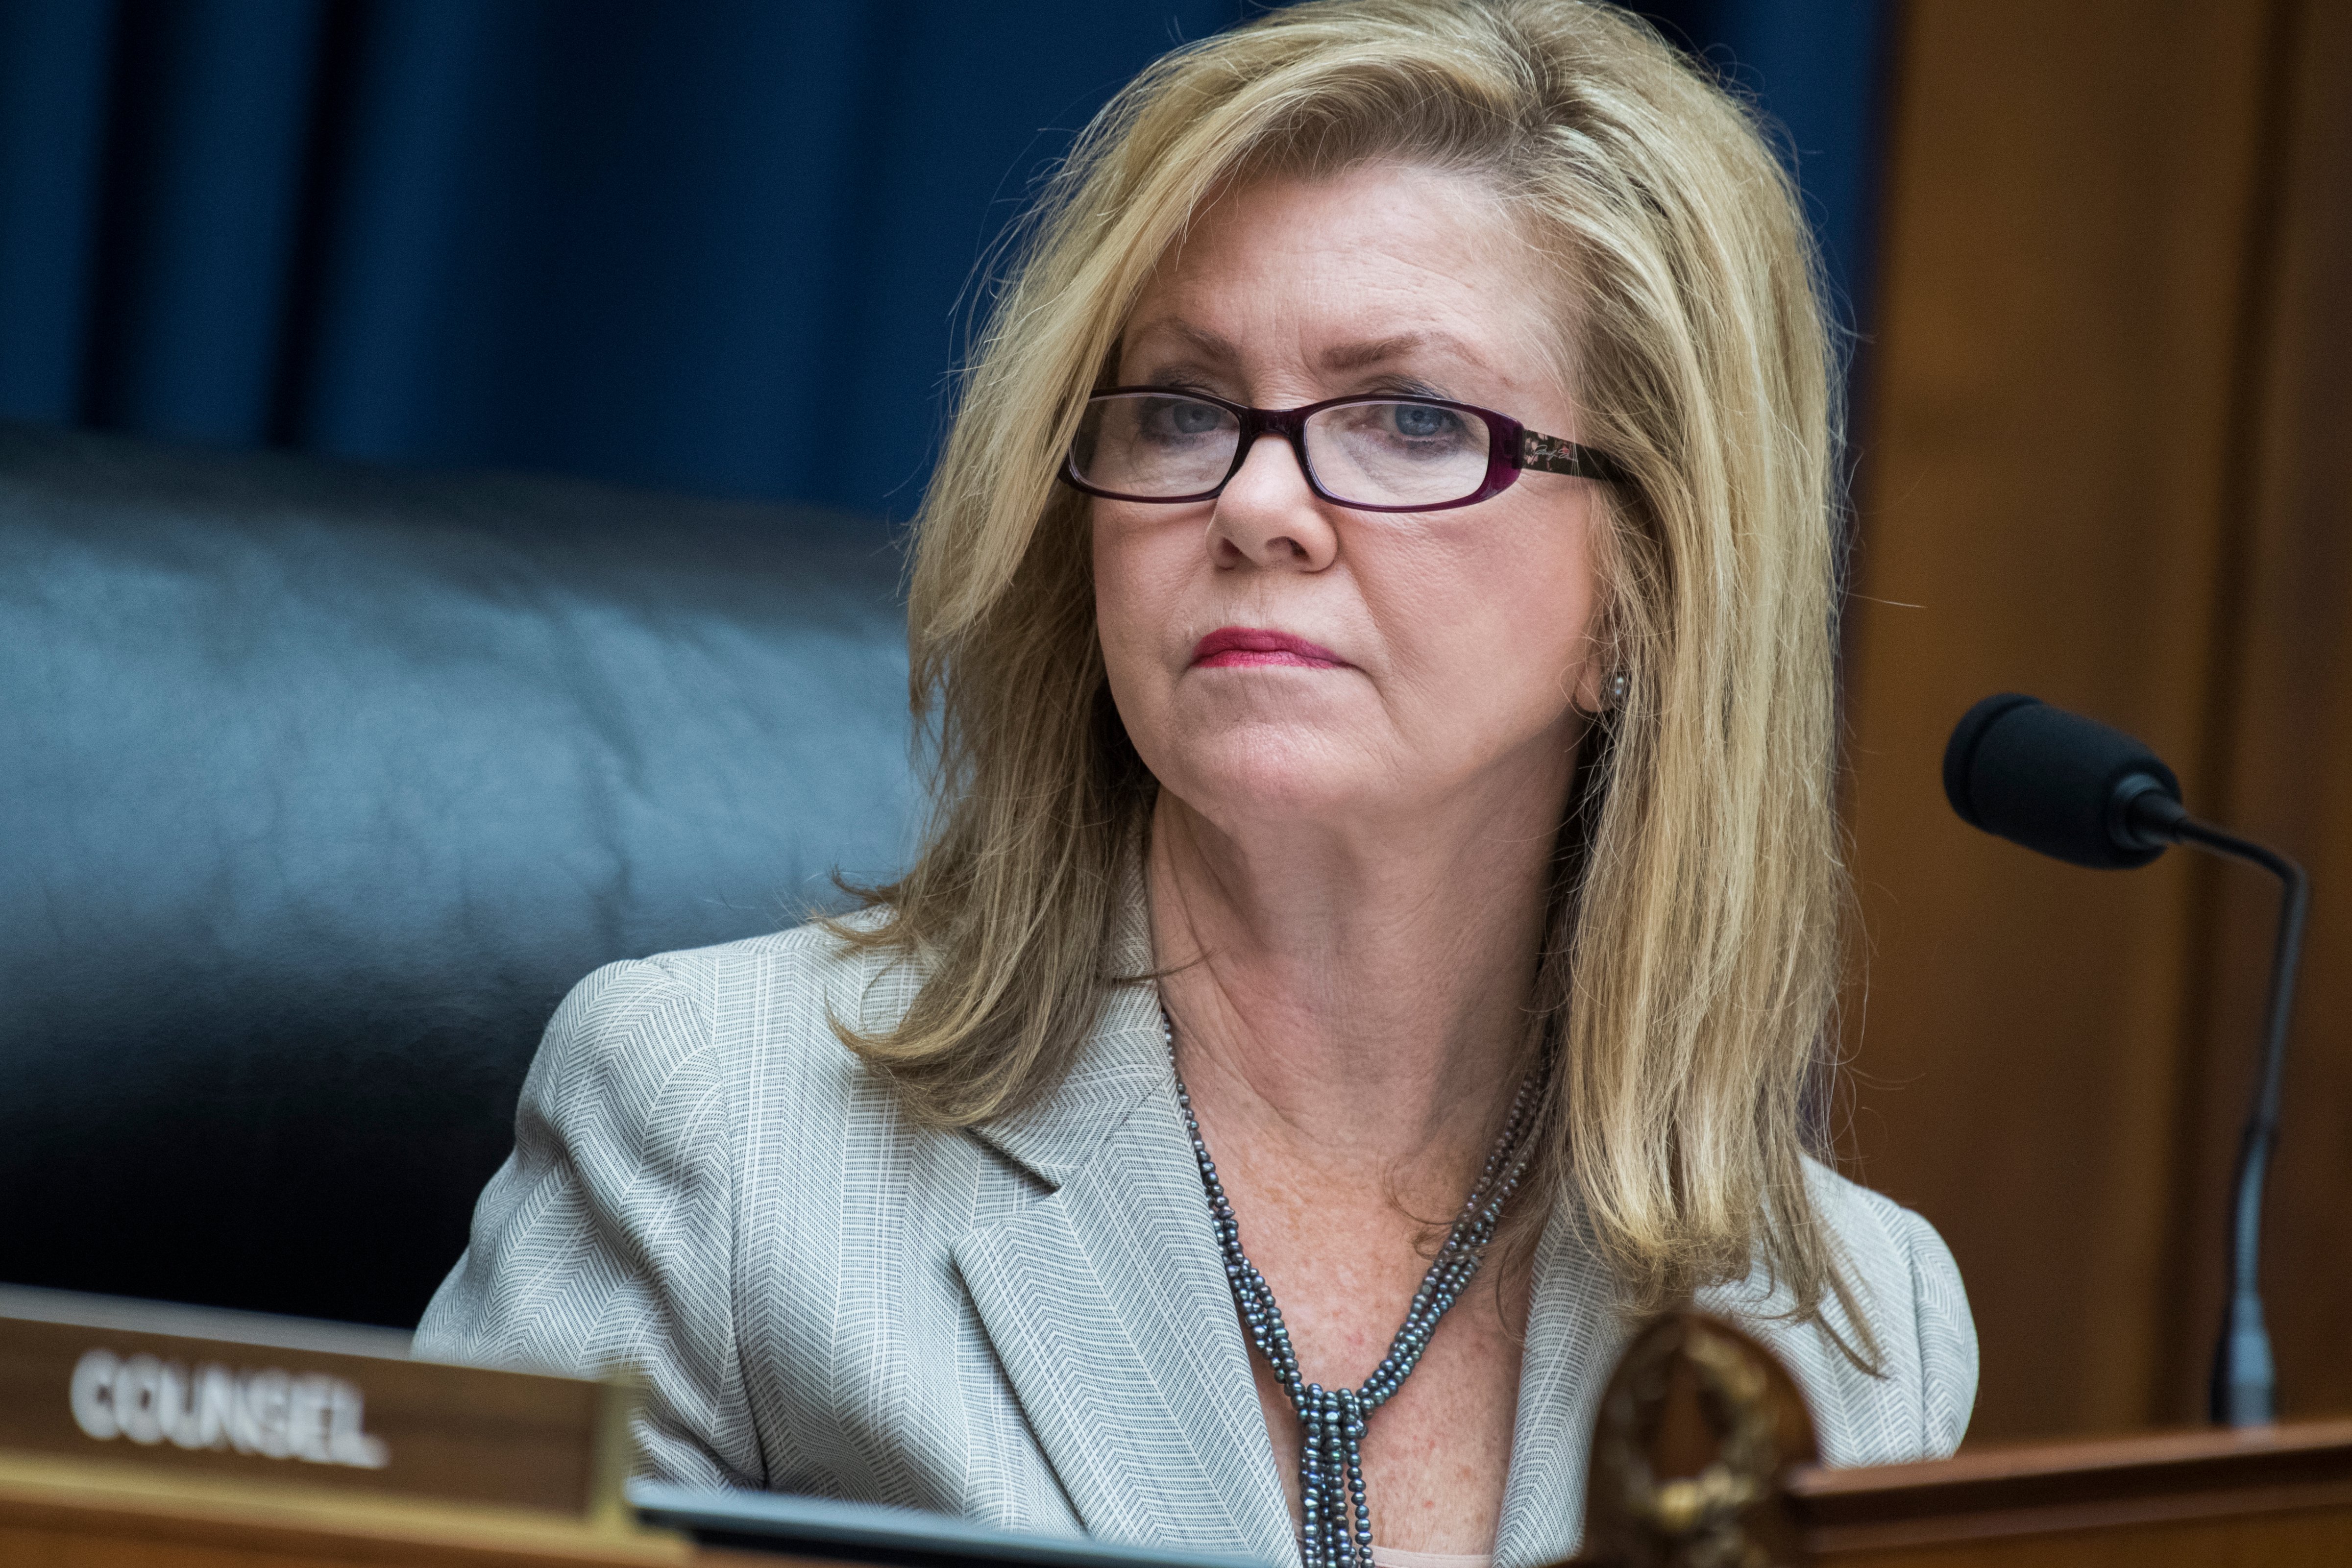 Chairman Marsha Blackburn, R-Tenn., conducts a House Energy and Commerce Communications and Technology Subcommittee markup in Rayburn Building on June 13, 2018. (Photo By Tom Williams/CQ Roll Call) (Tom Williams—CQ-Roll Call,Inc.)